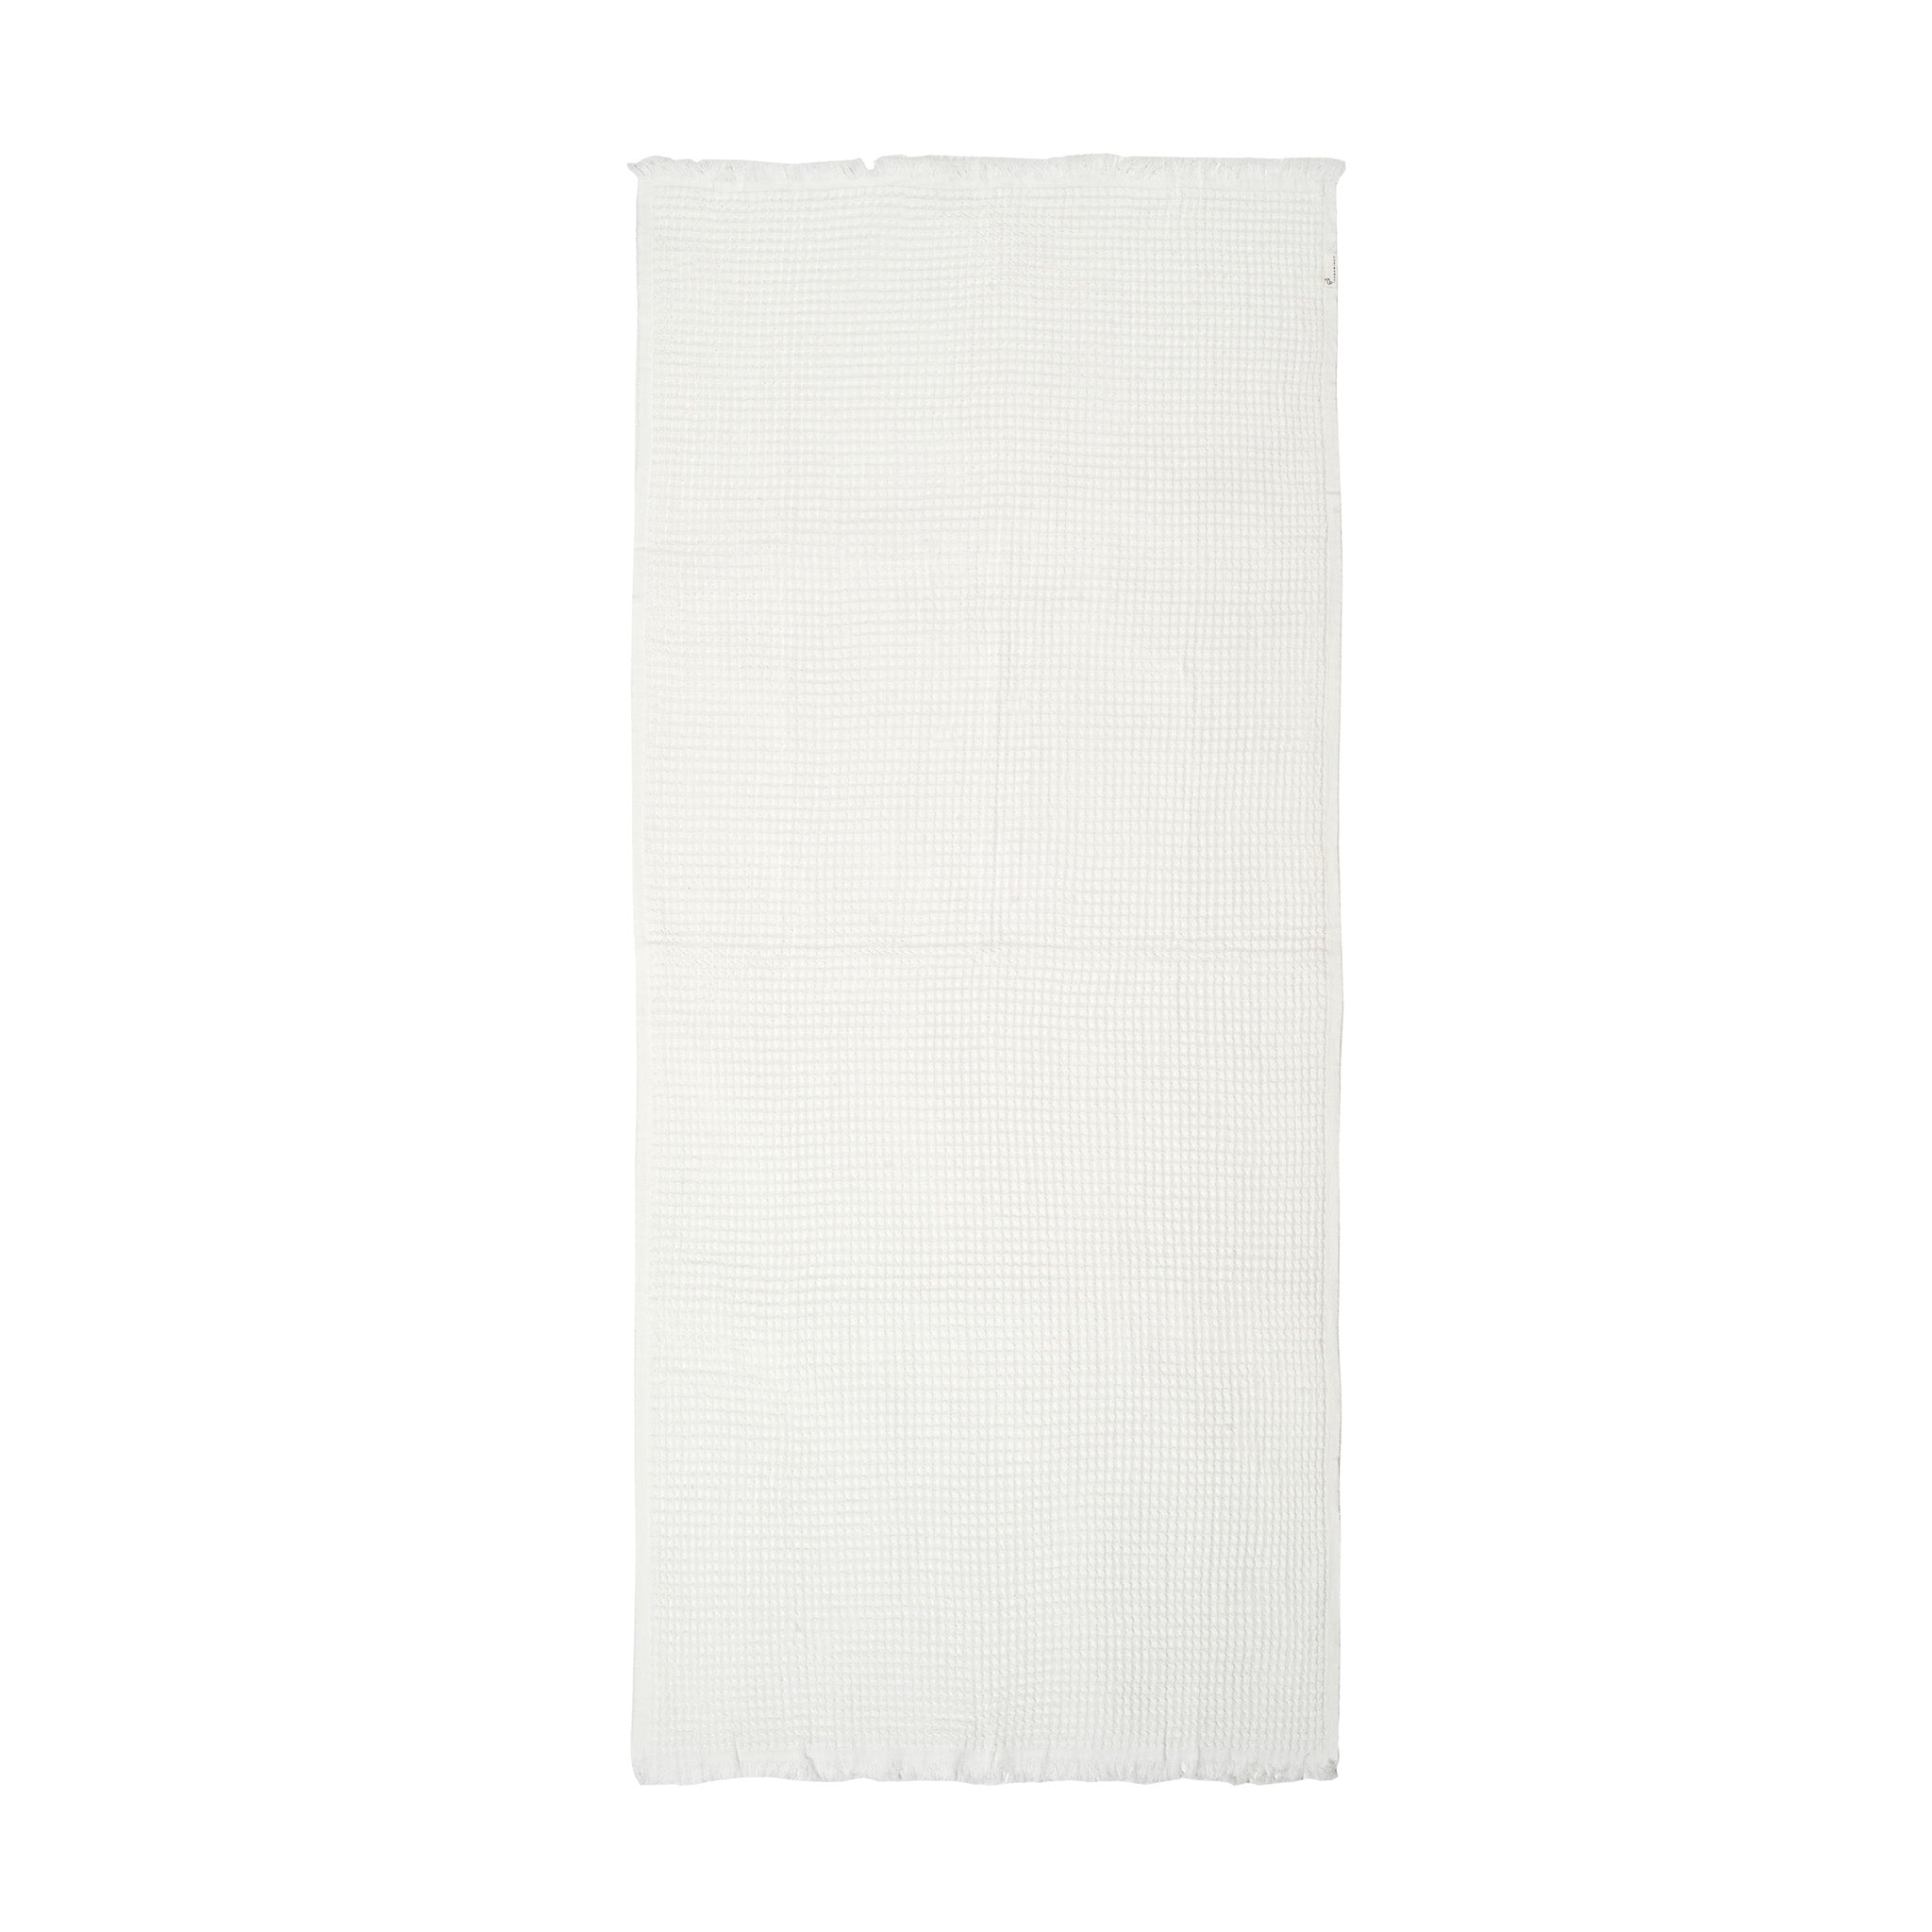 Bruges Towel Pure White